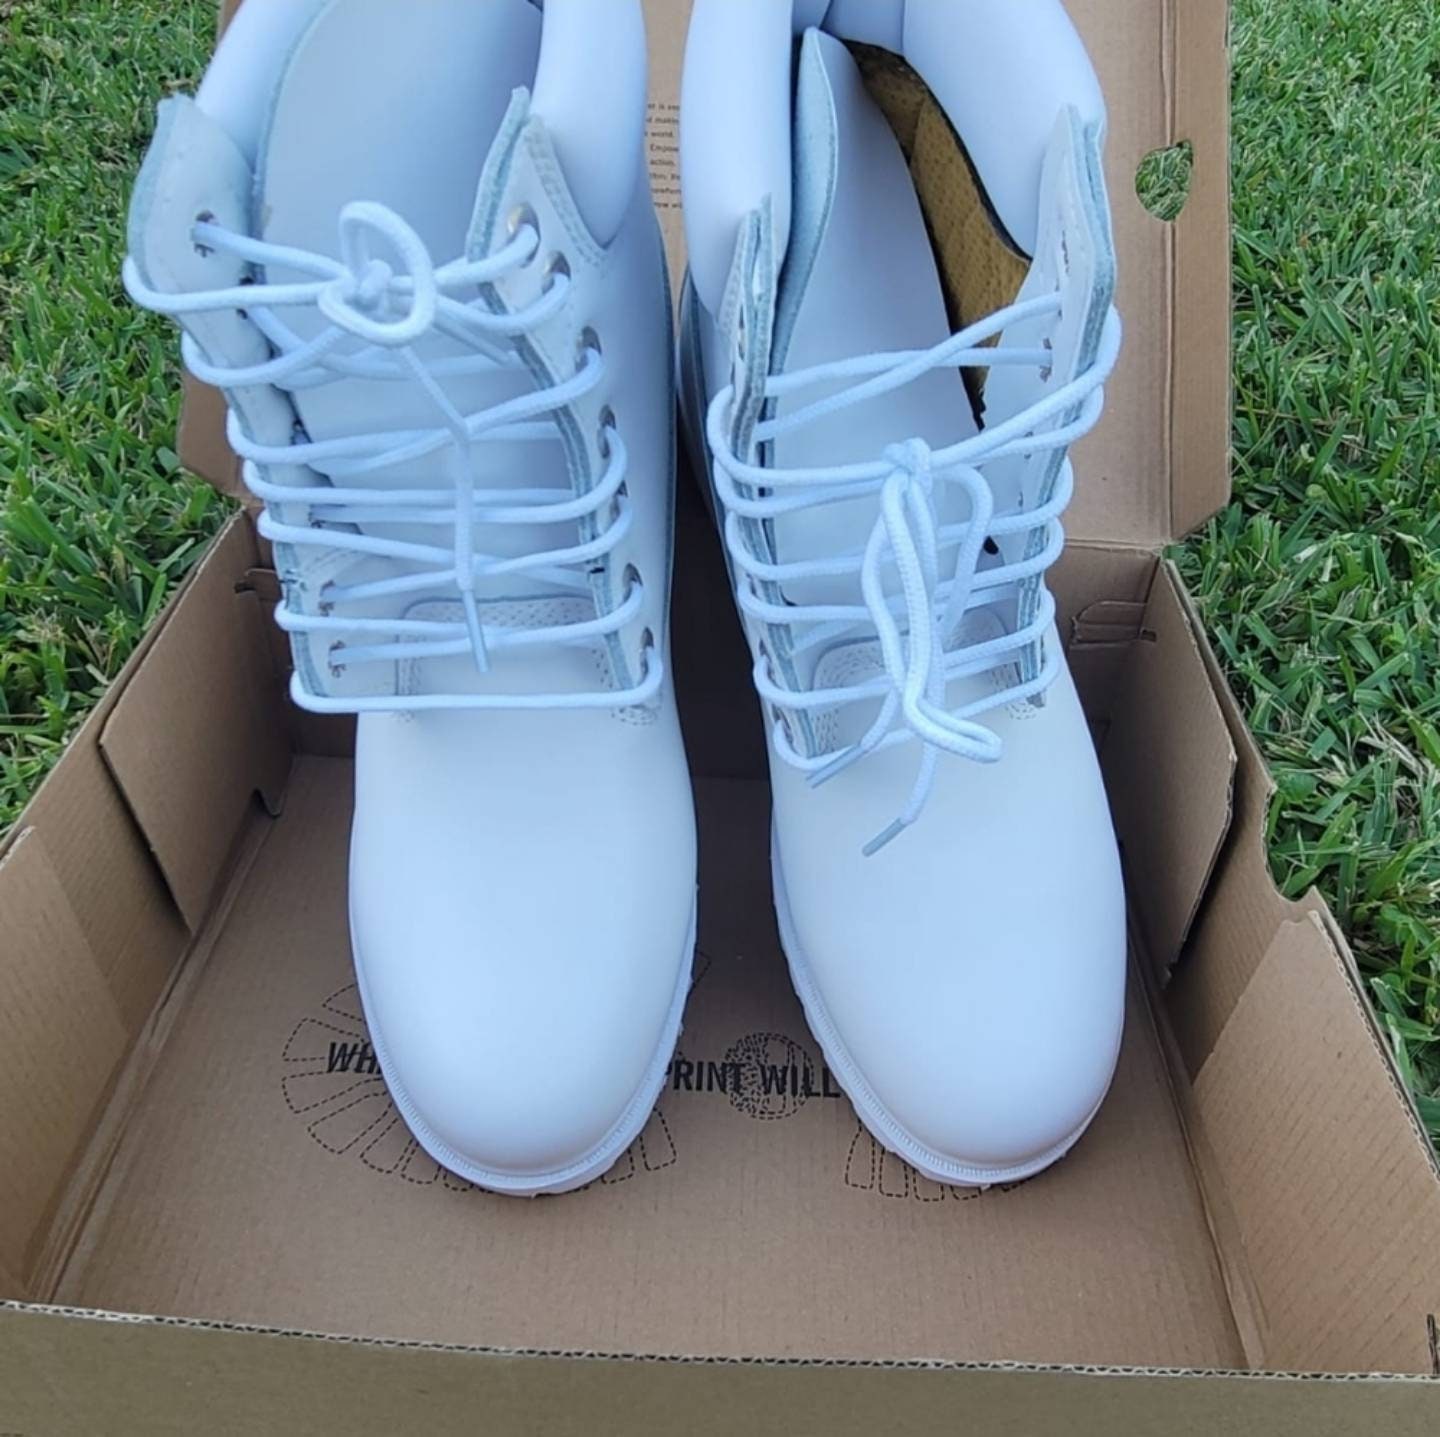 Timberland Boots 6 Inches White Fashion Casual - Etsy